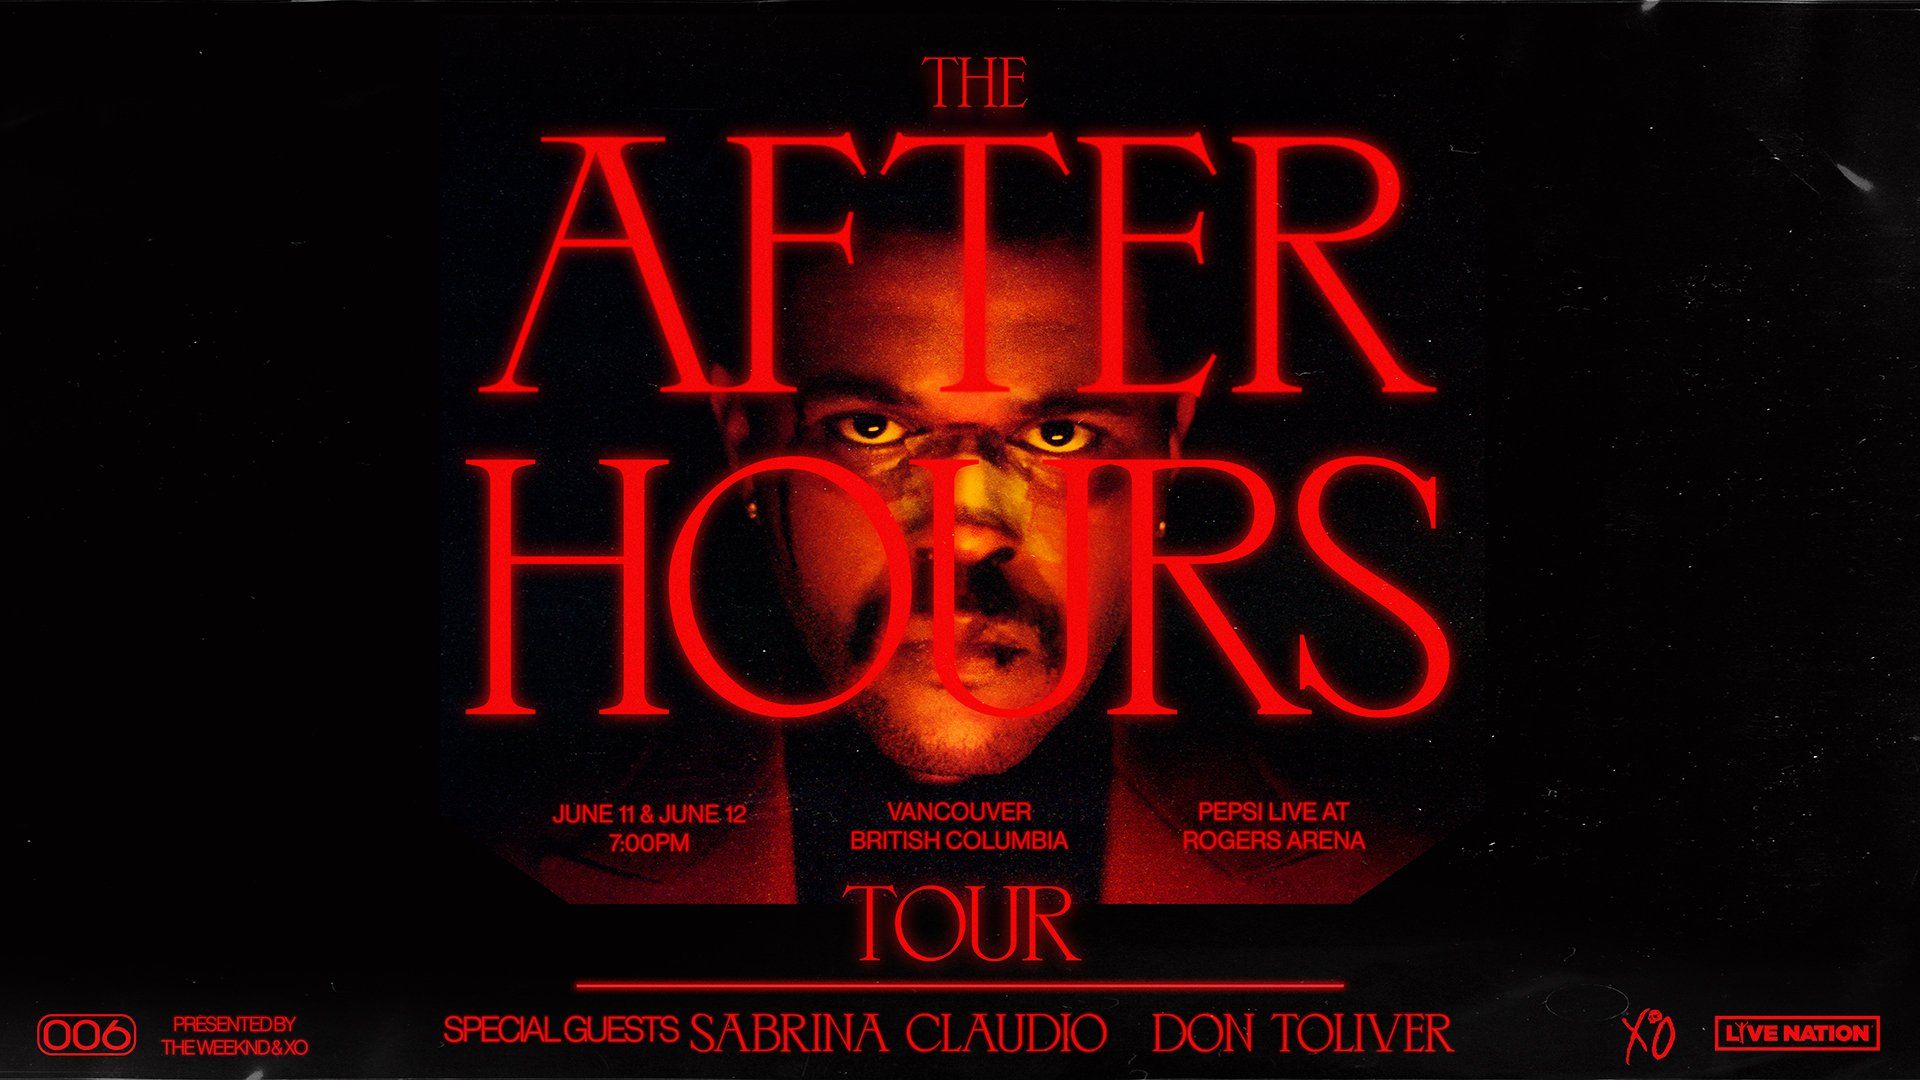 The Weeknd 'The After Hours Tour'